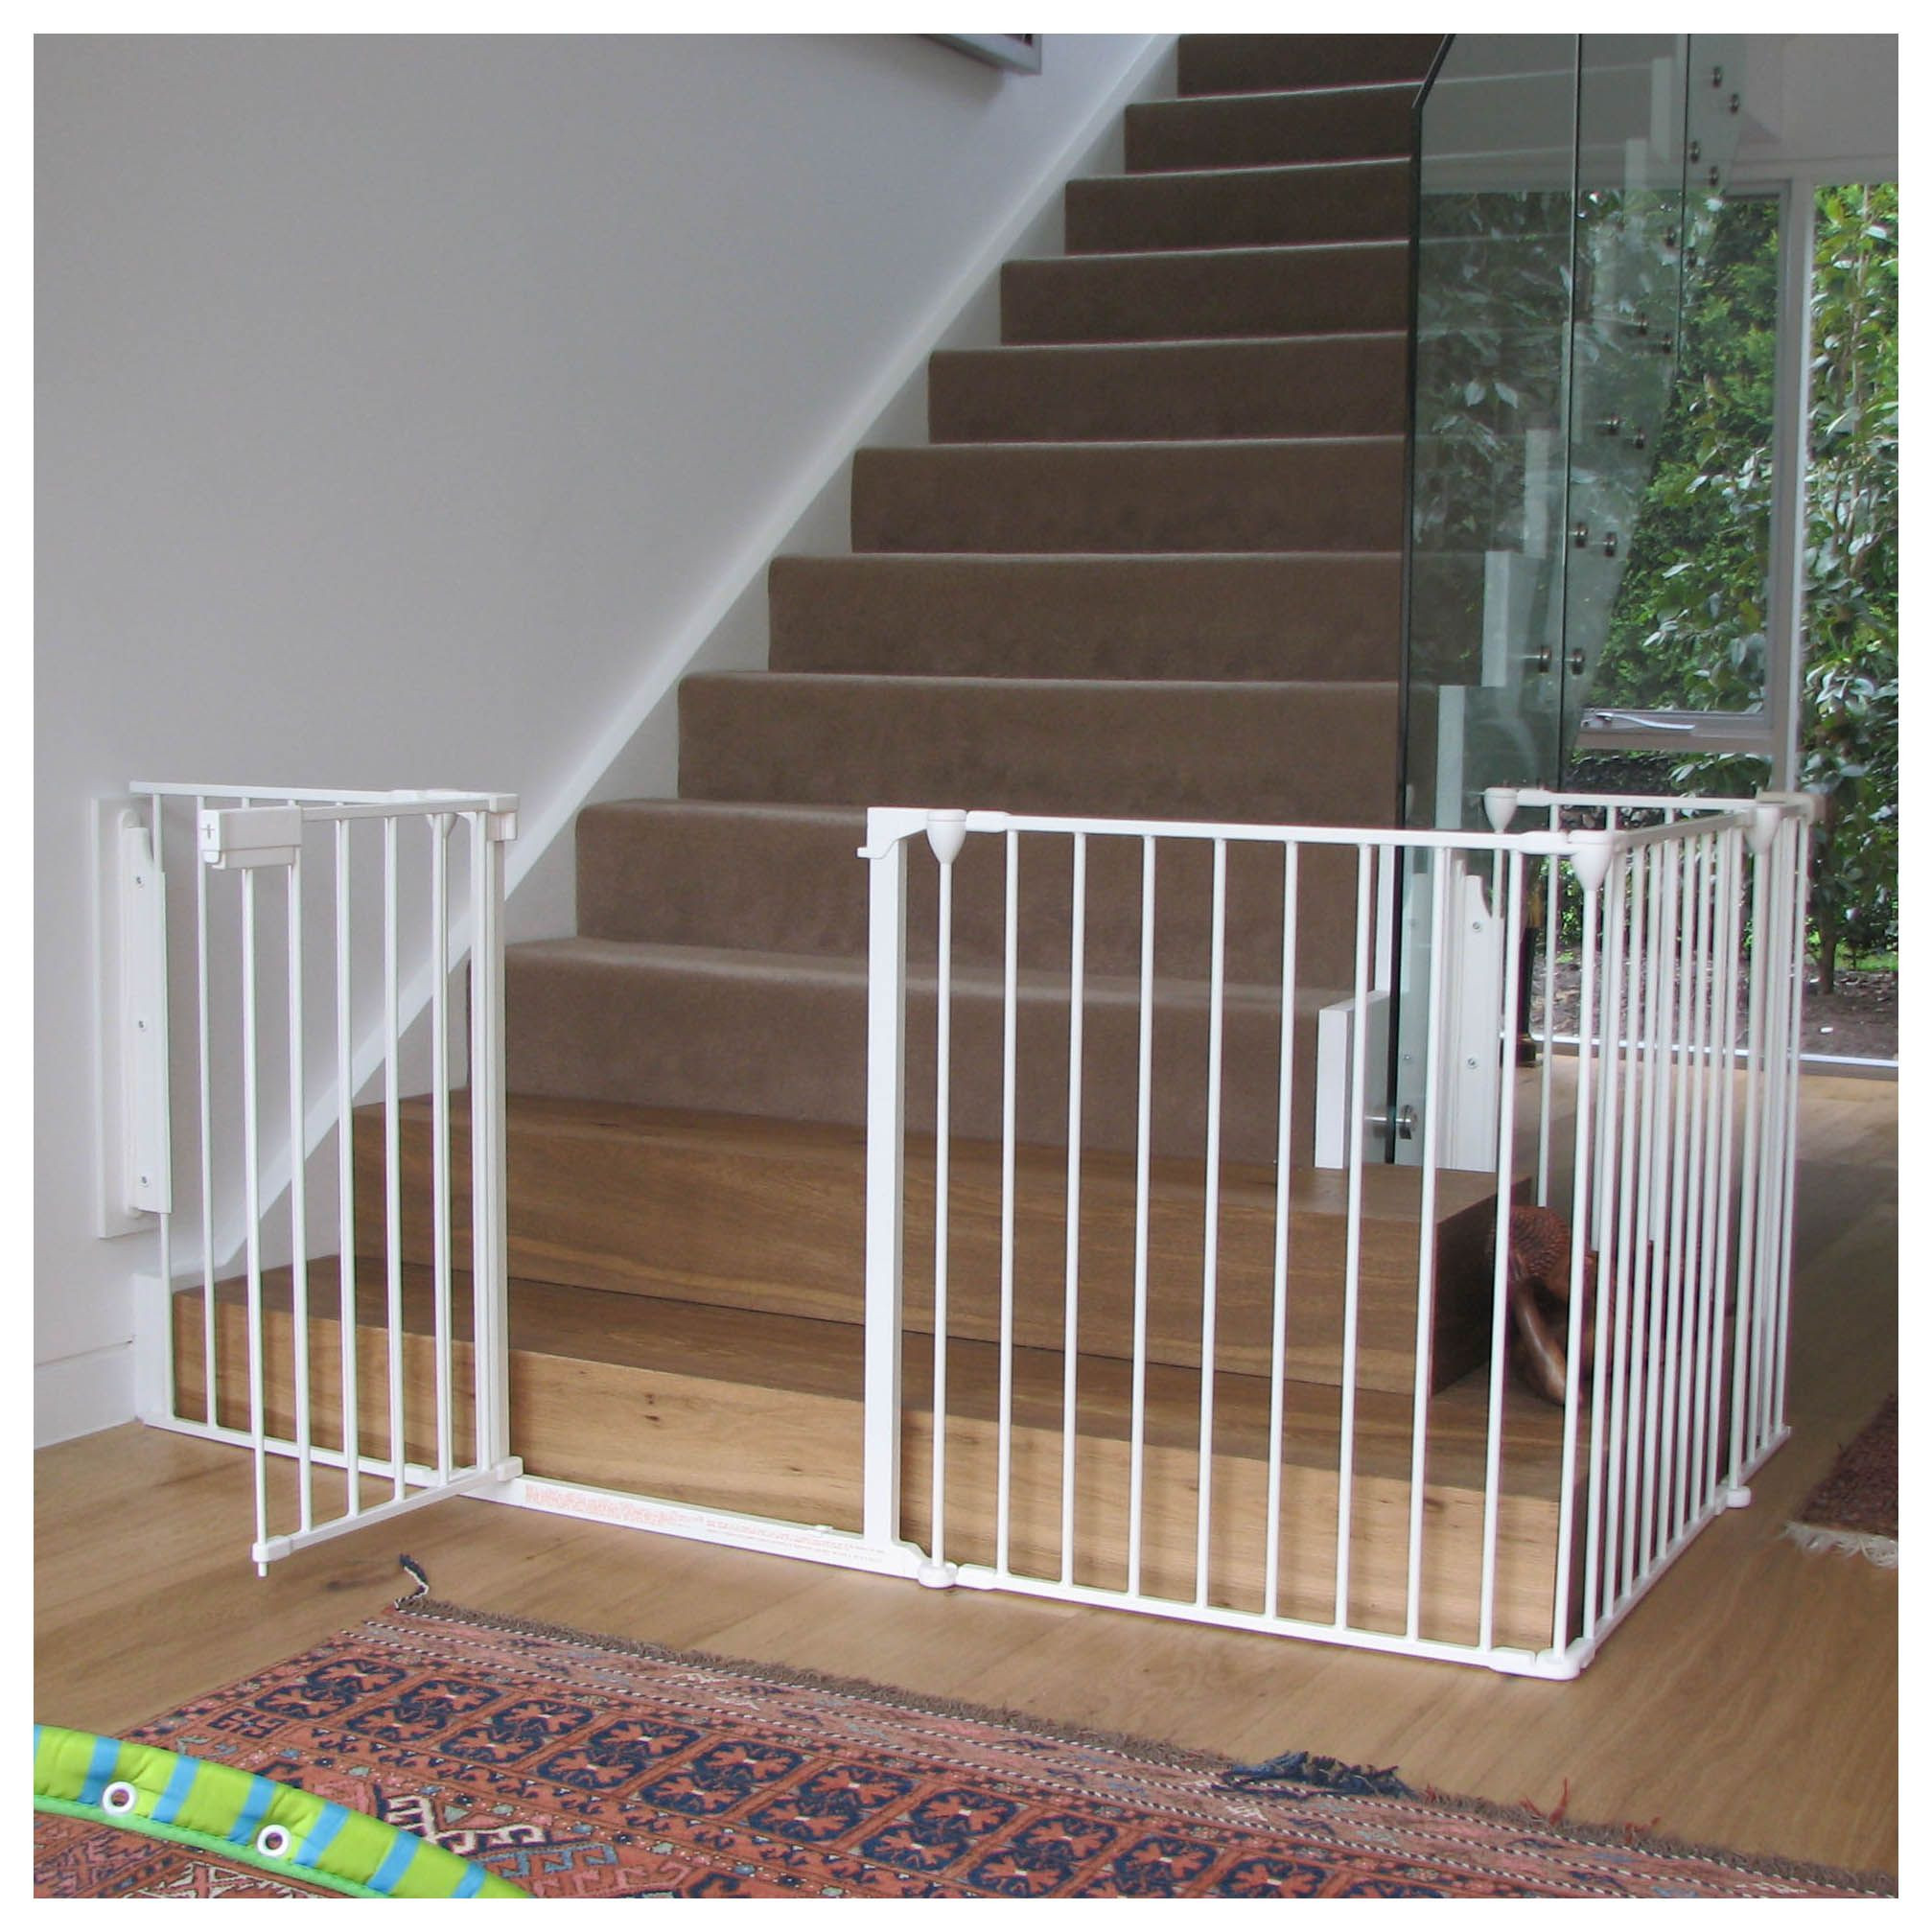 DIY Baby Gate For Stairs
 Bust of Good Child Safety Gates For Stairs